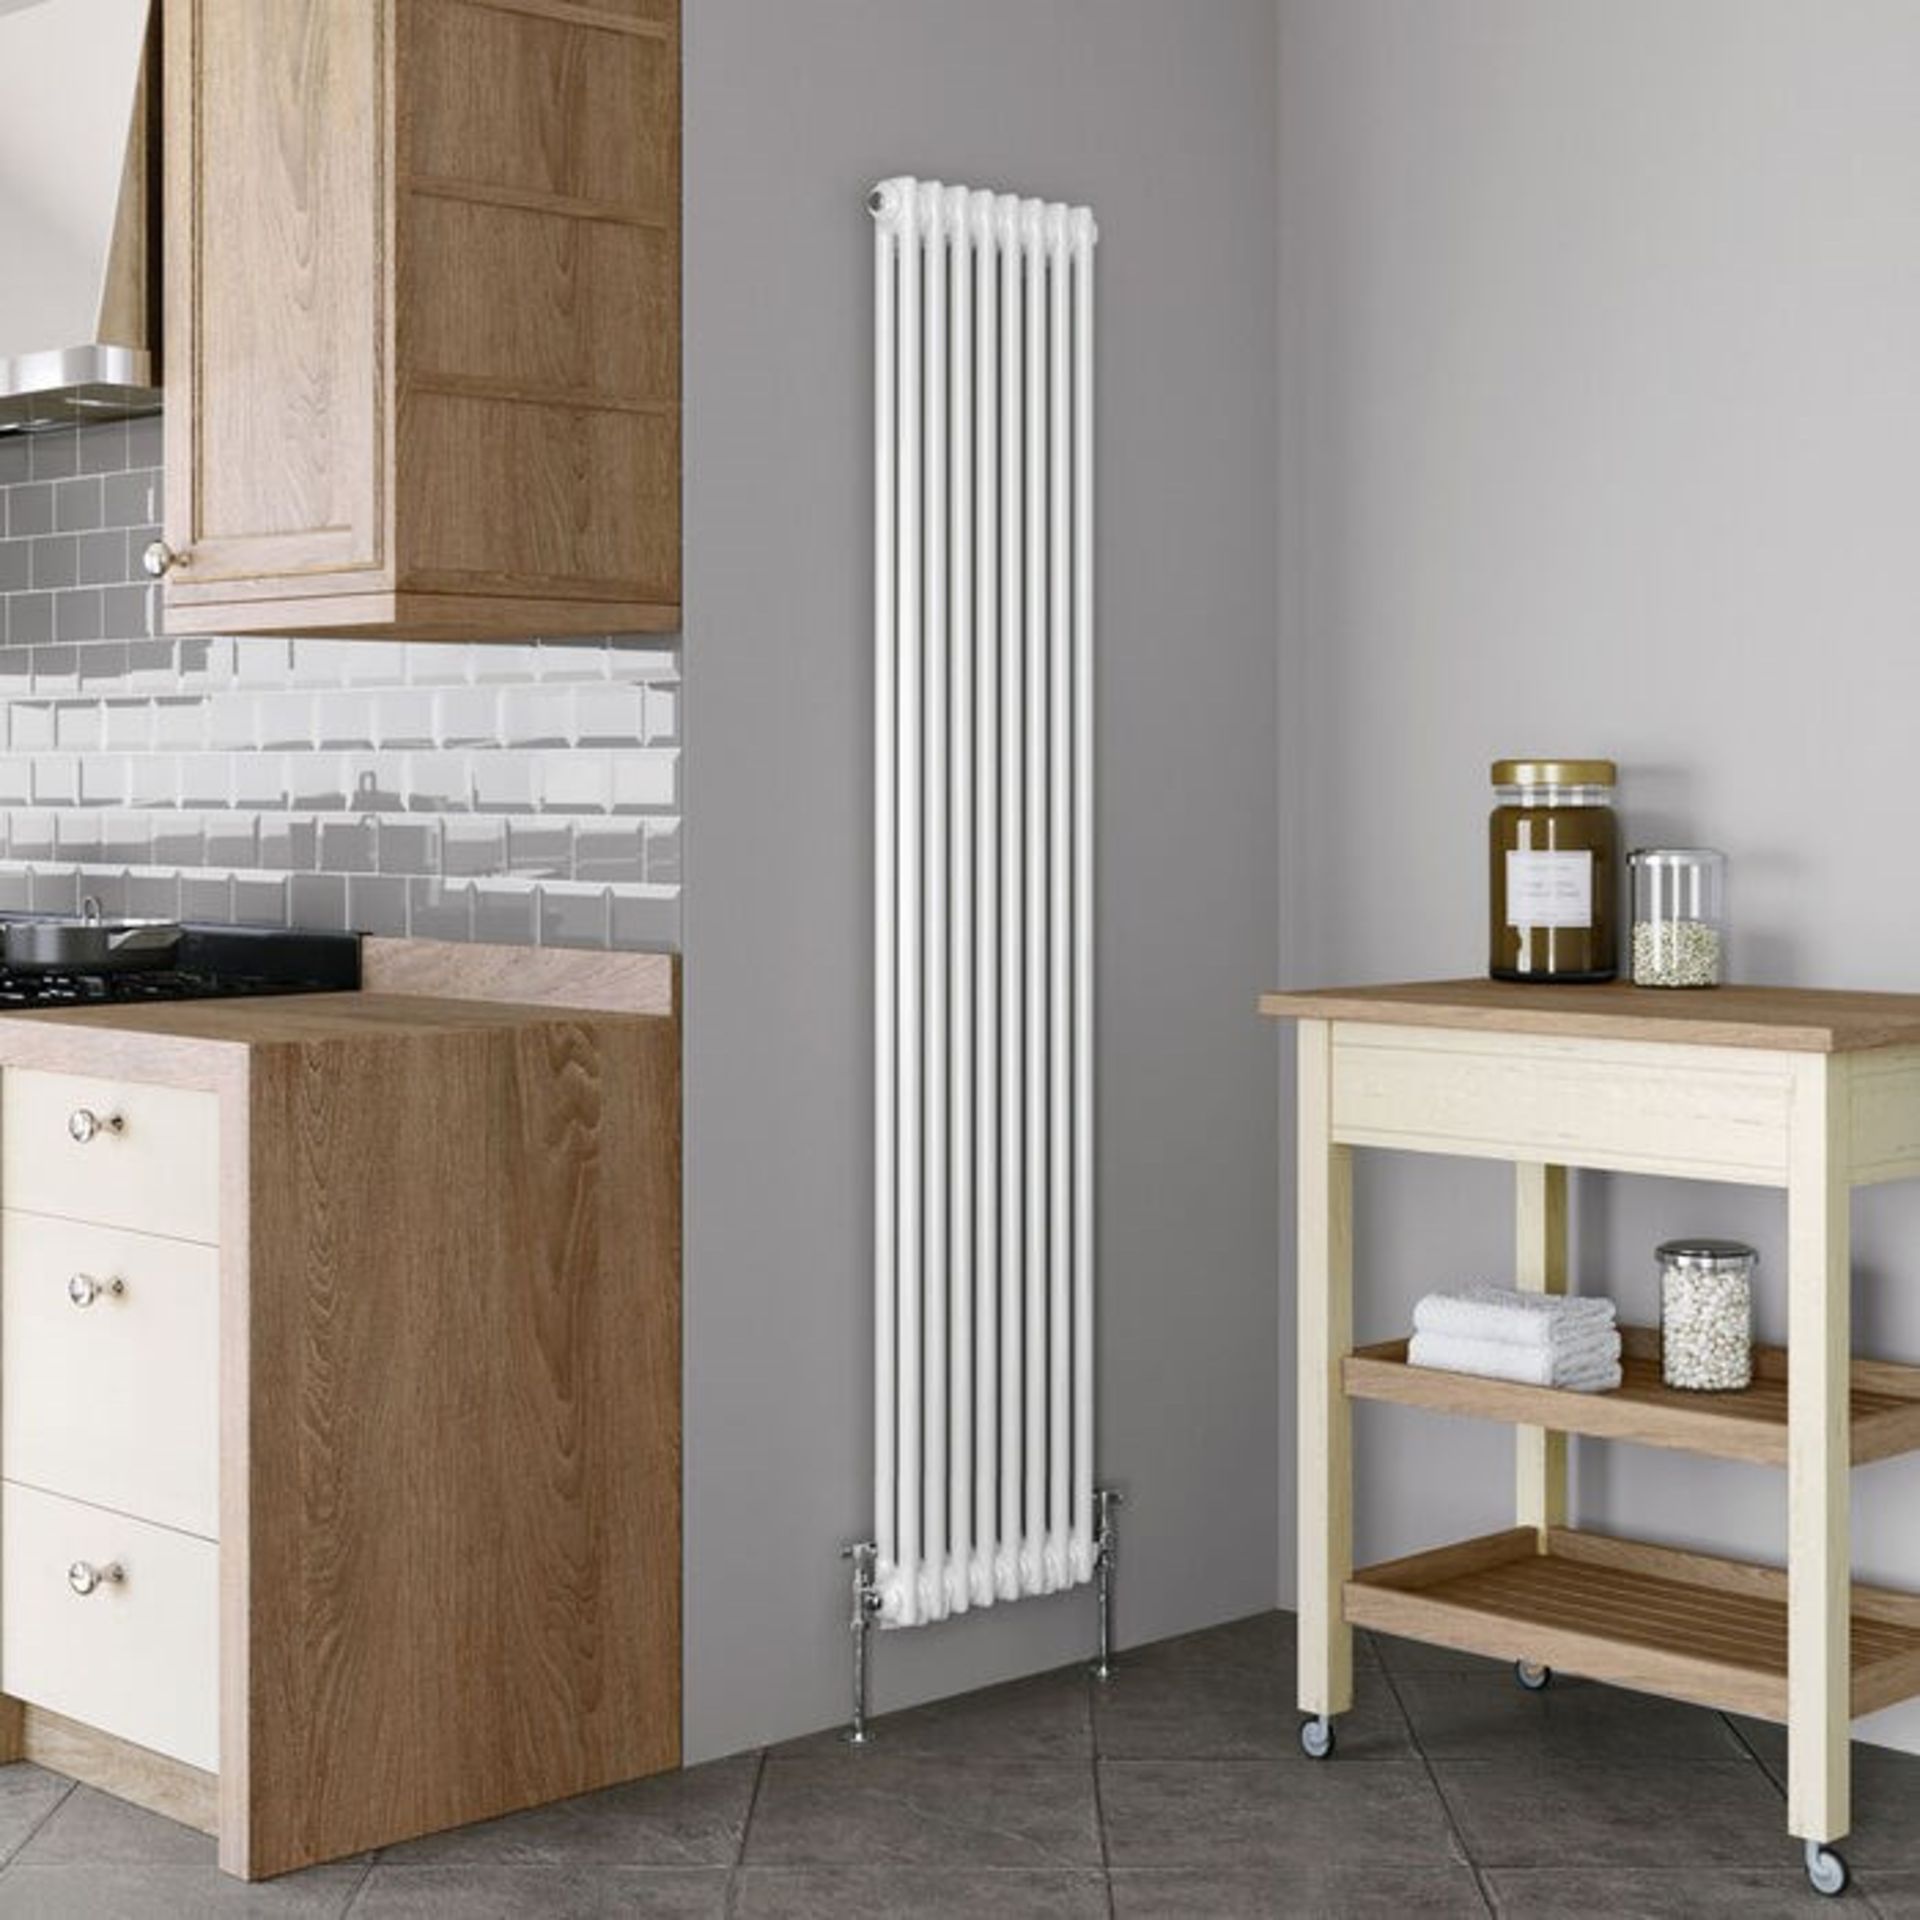 Brand New (DD132) 2000x306mm White Double Panel Vertical Colosseum Traditional Radiator.RRP £326.99. - Image 3 of 3